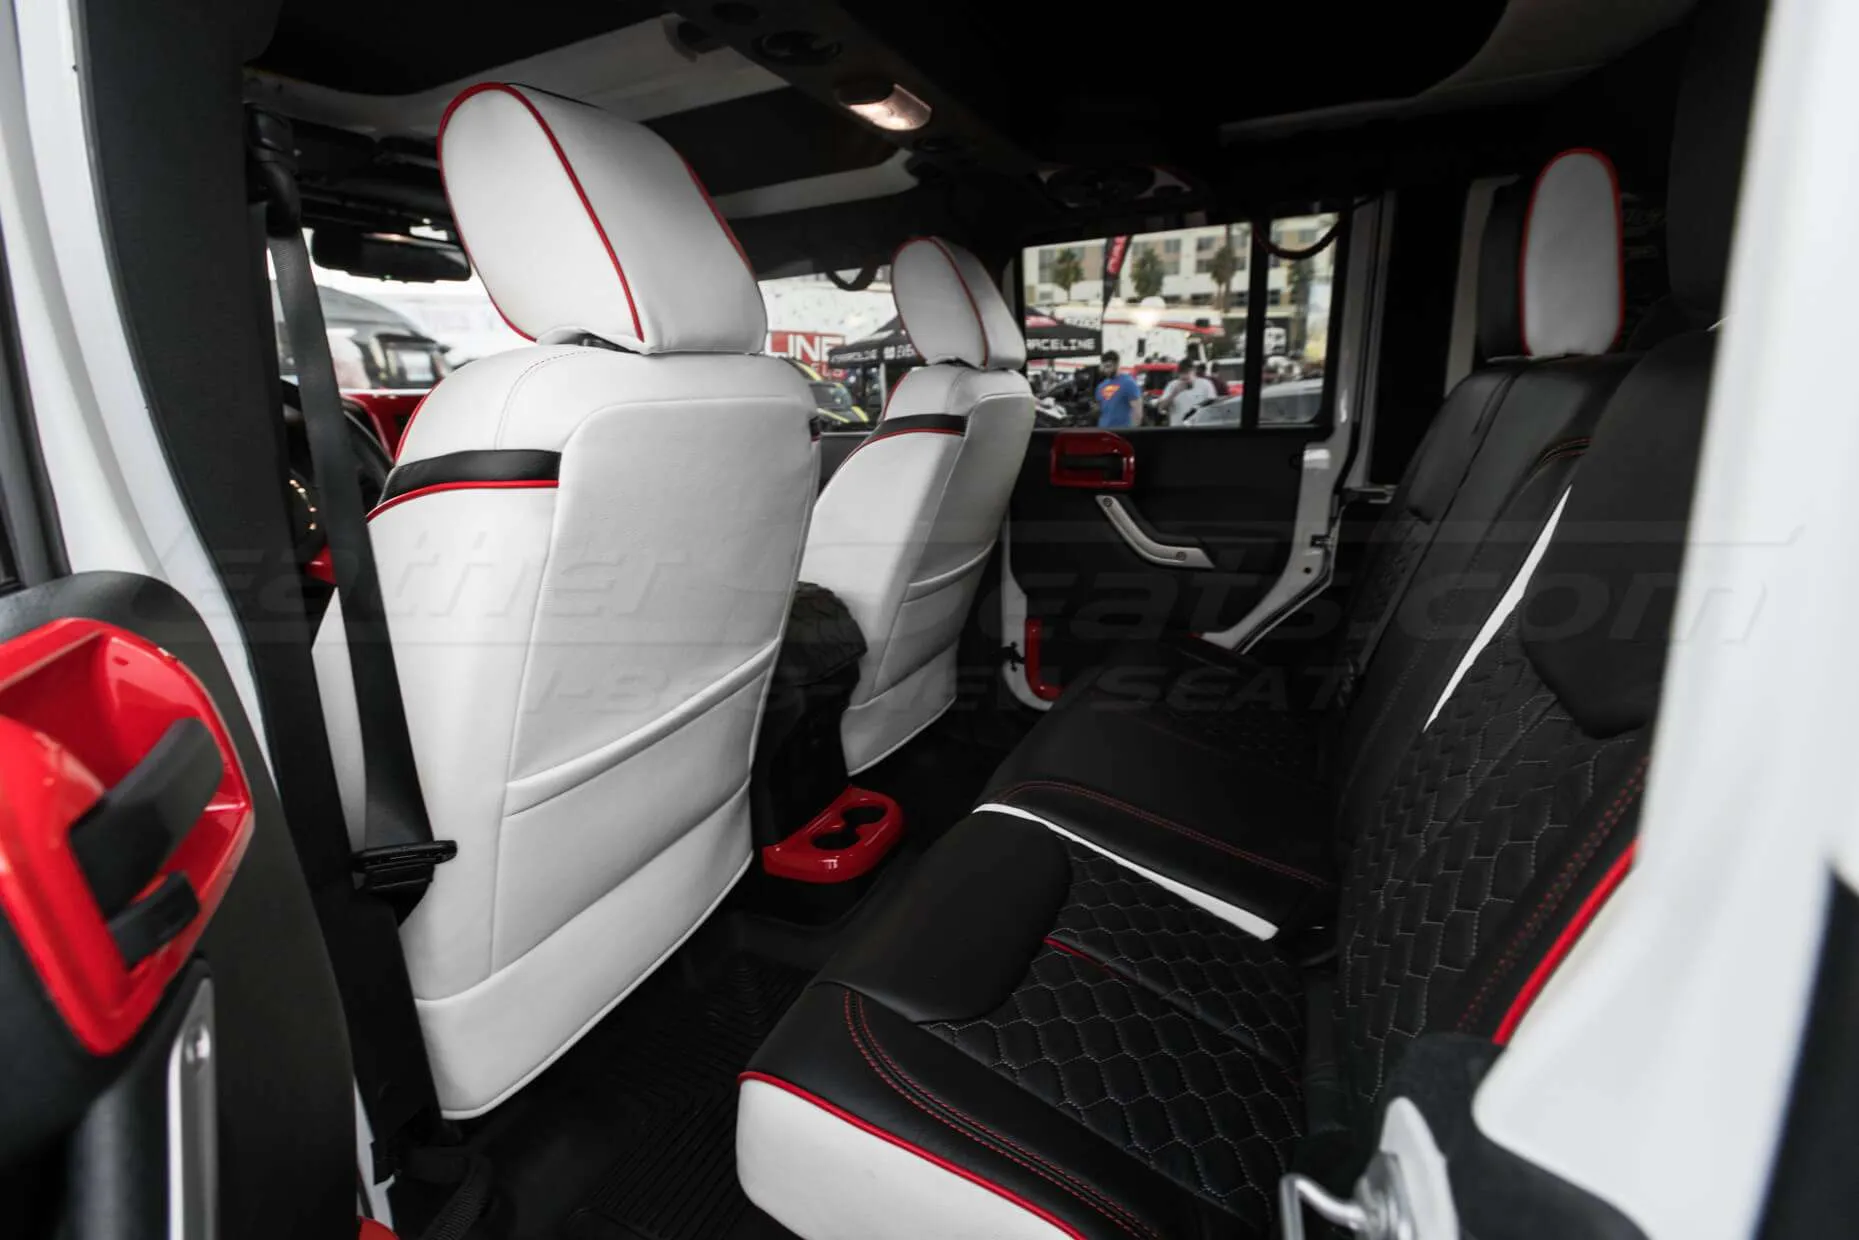 2013-2018 Jeep Wrangler Reticulated Hex installed Upholstery Kit - White/Black/Bright Red - Rear seats from drivers side & back of front seats